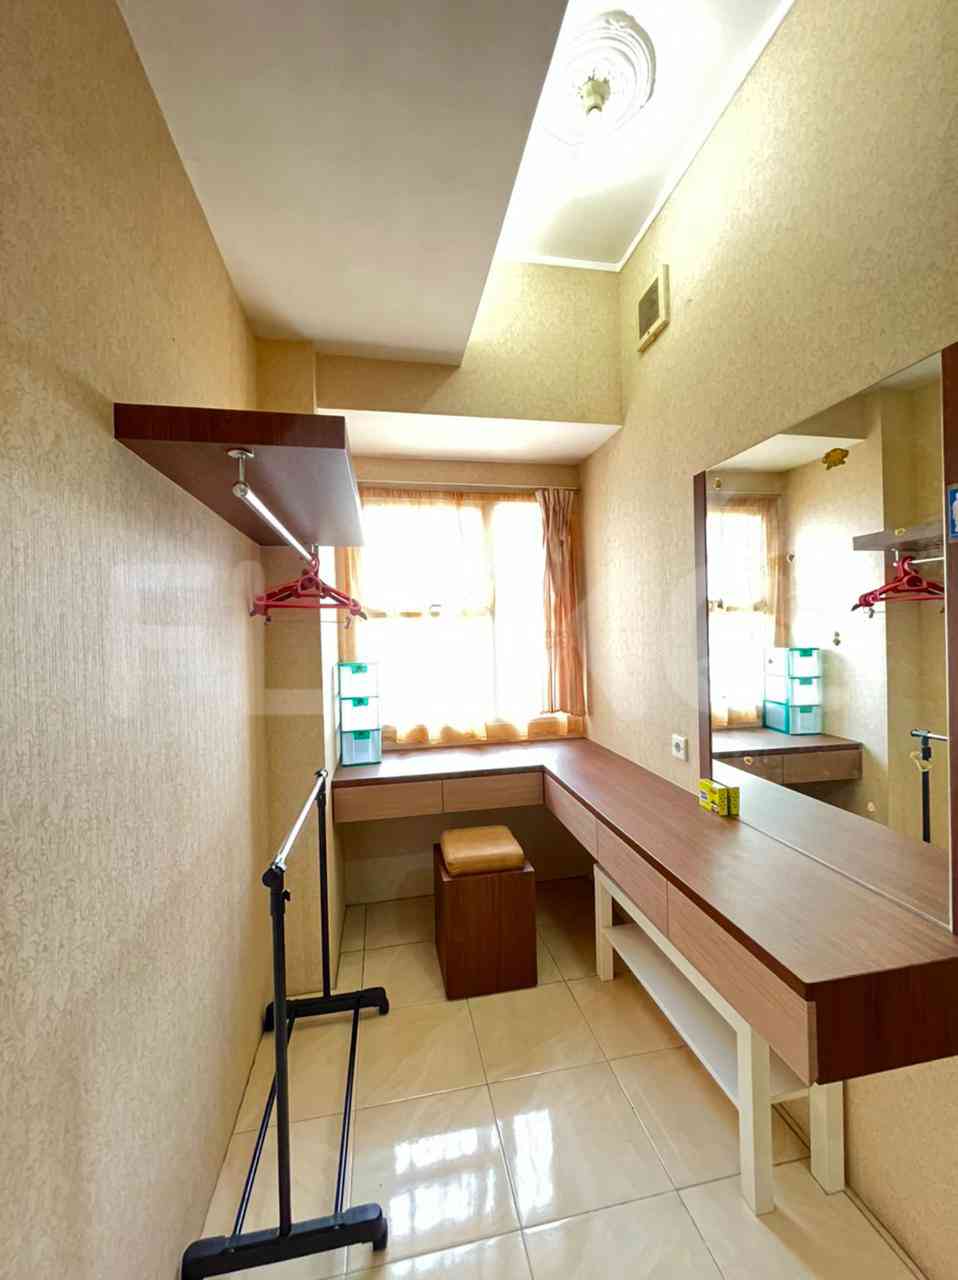 2 Bedroom on 26th Floor for Rent in Seasons City Apartment - fgrba5 7